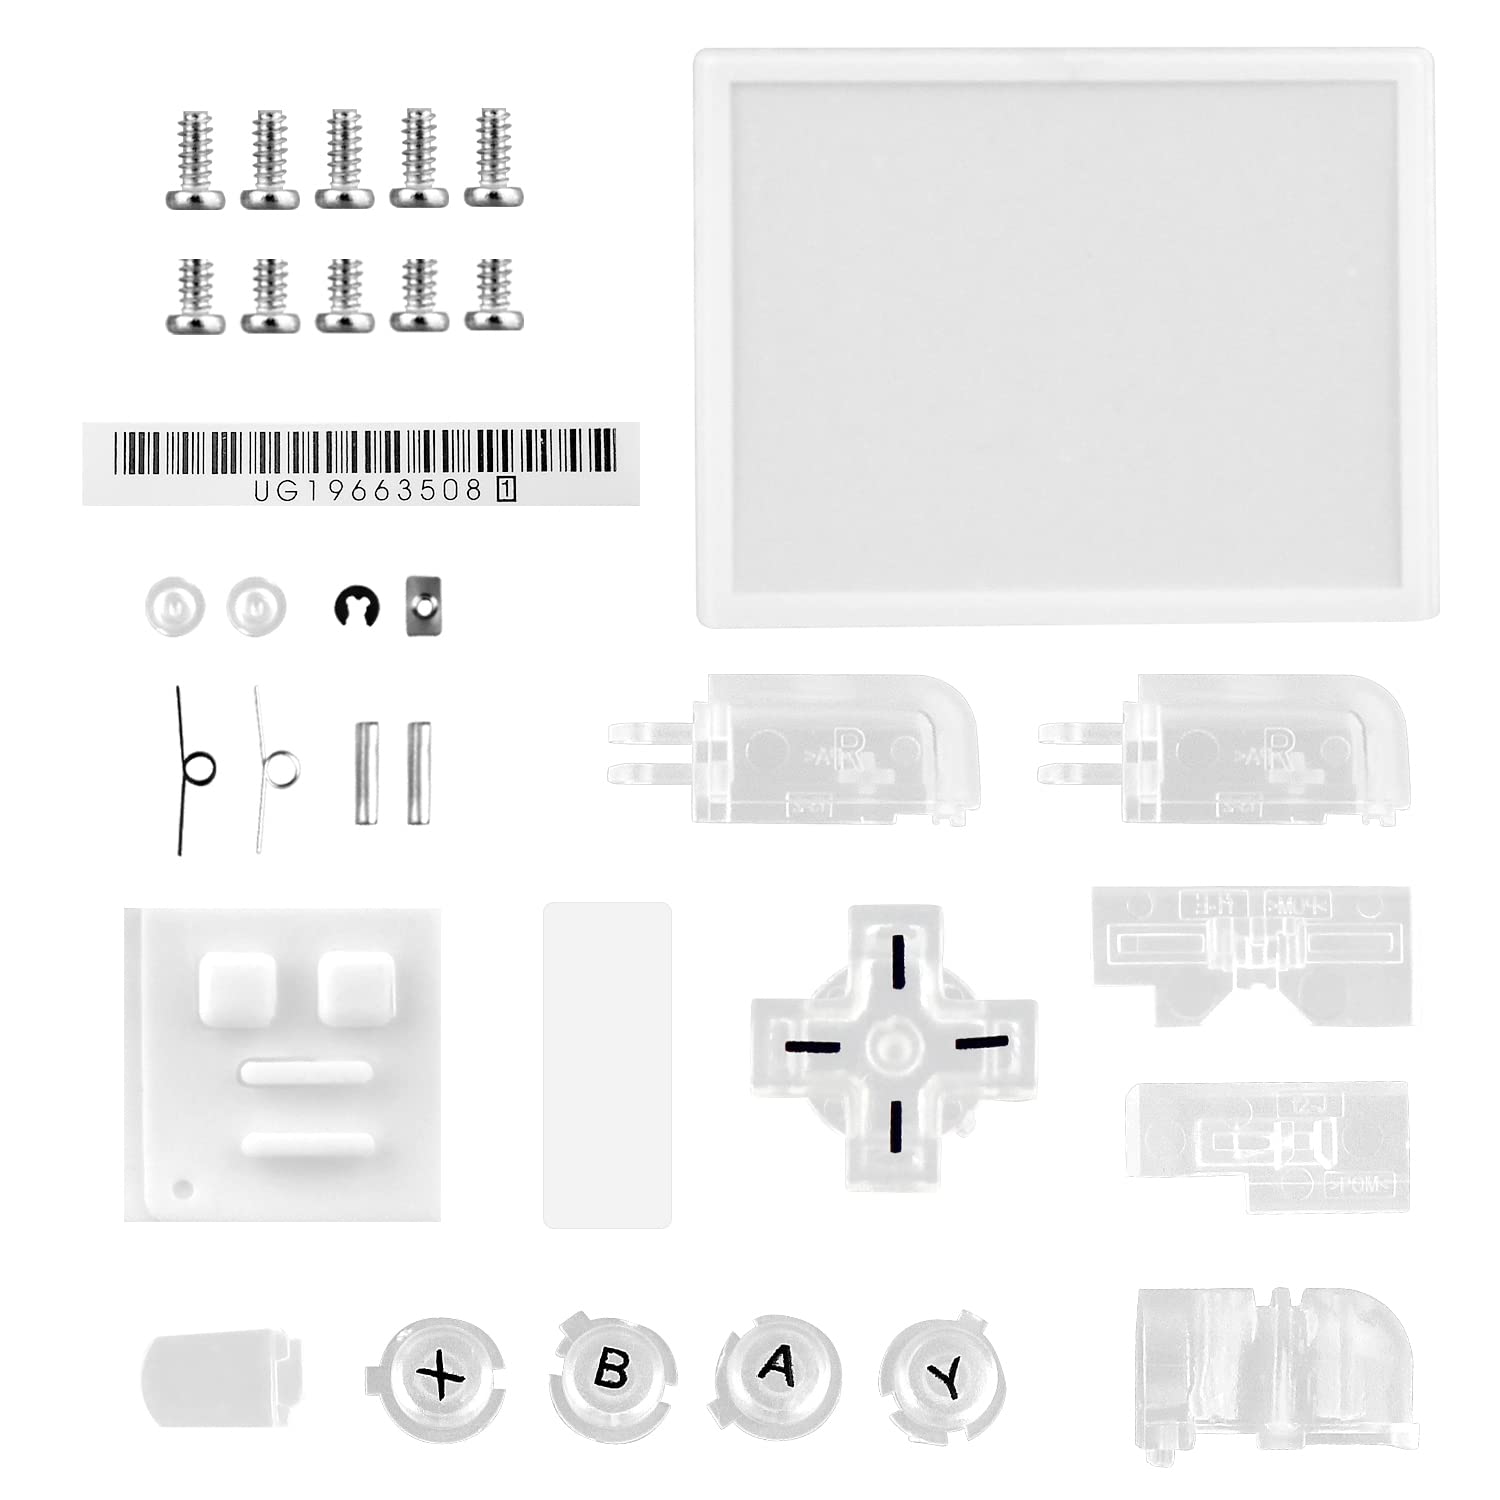 OSTENT Full Repair Parts Replacement Housing Shell Case Kit for Nintendo DS Lite NDSL Color Clear